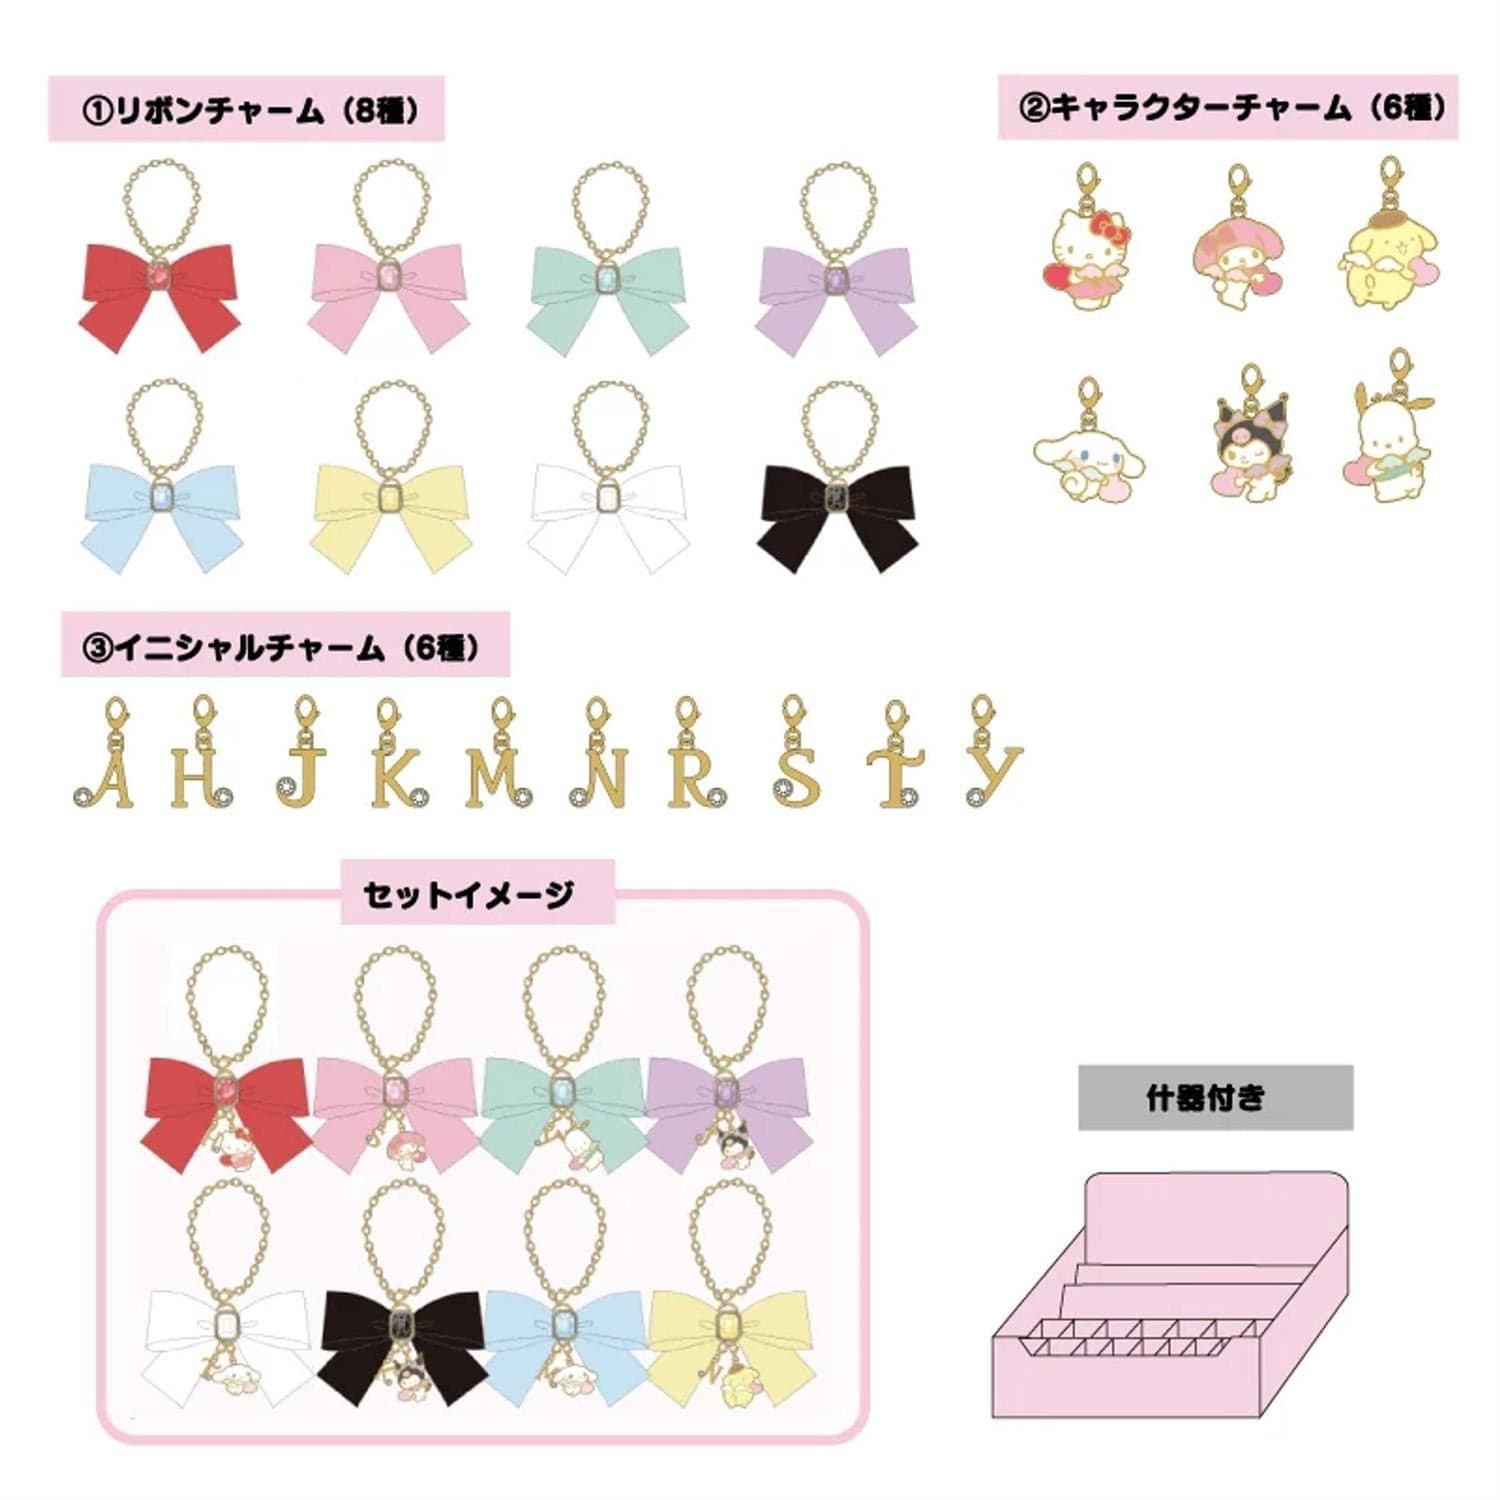 Sanrio Pack Yourself- Personalized Keychain